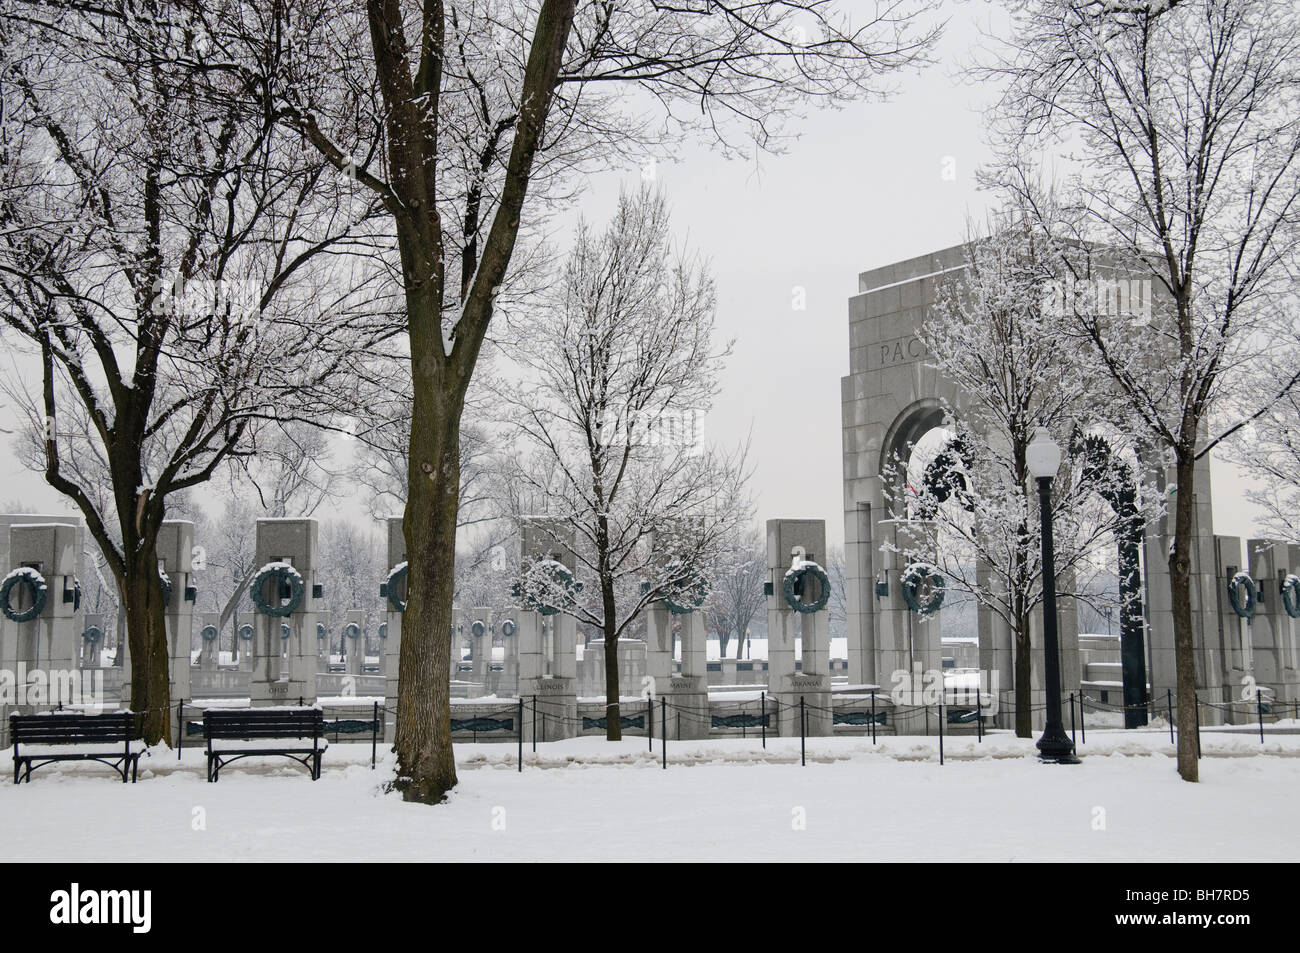 WASHINGTON DC, USA - A snow-covered World War Two Memorial on the National Mall in Washington DC. Stock Photo